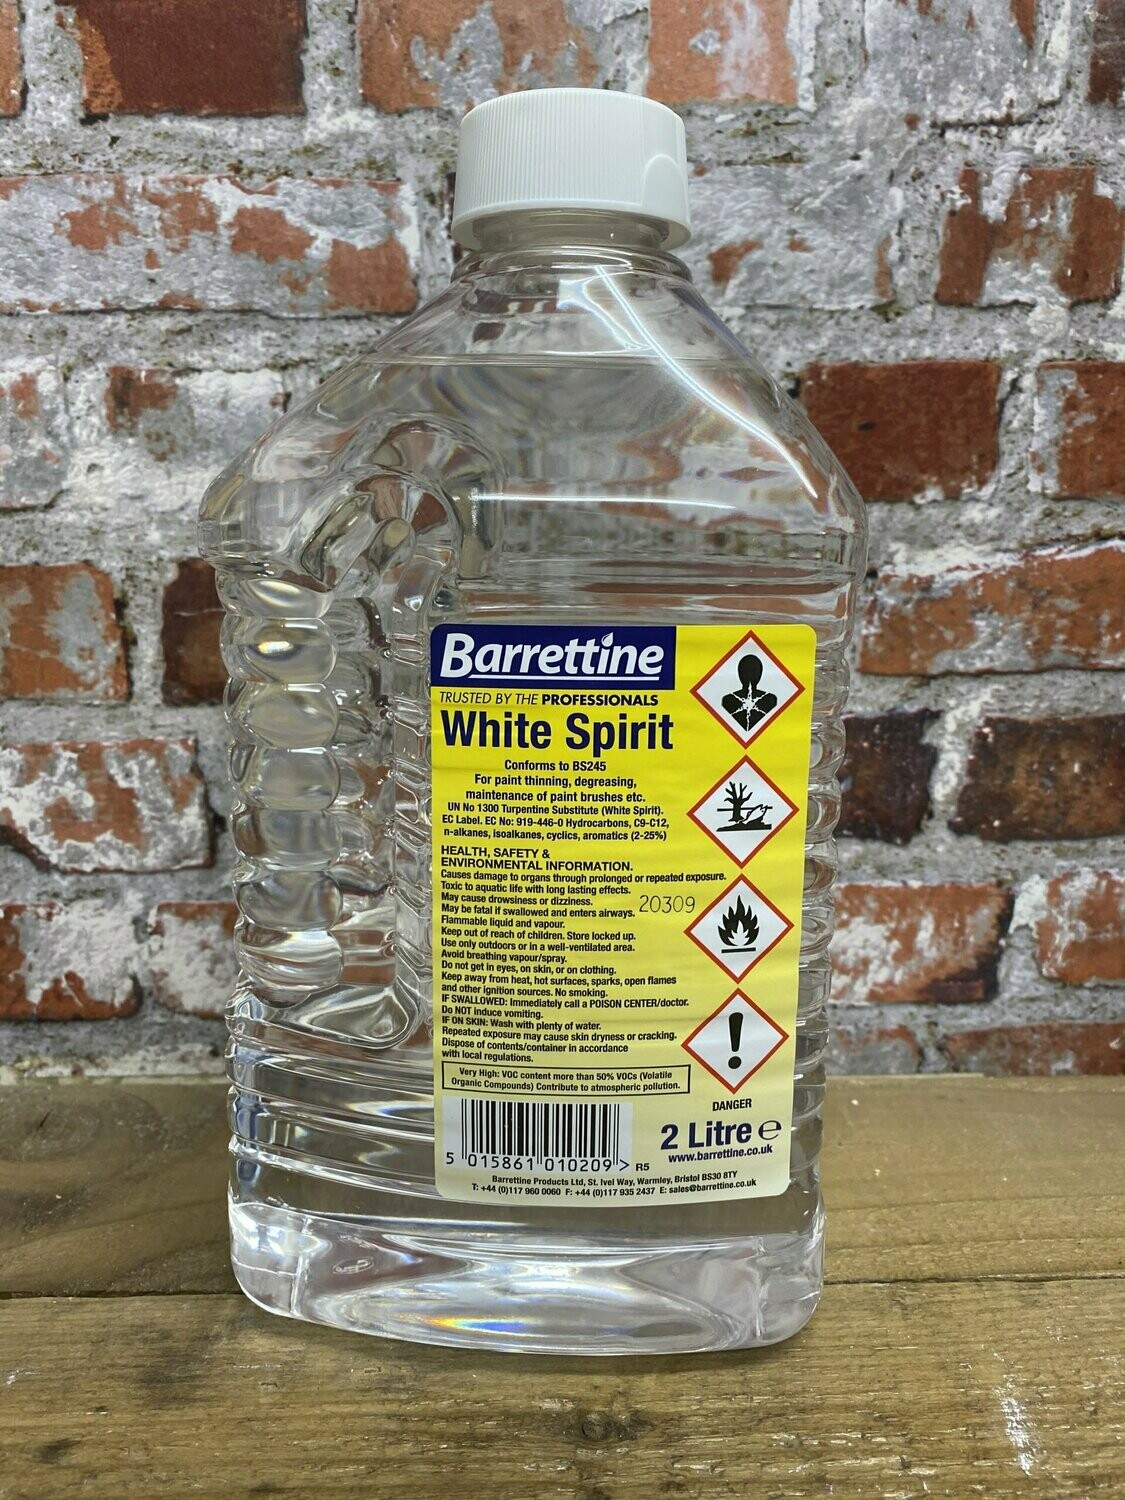 How To Dispose Of White Spirit The Right Way UK